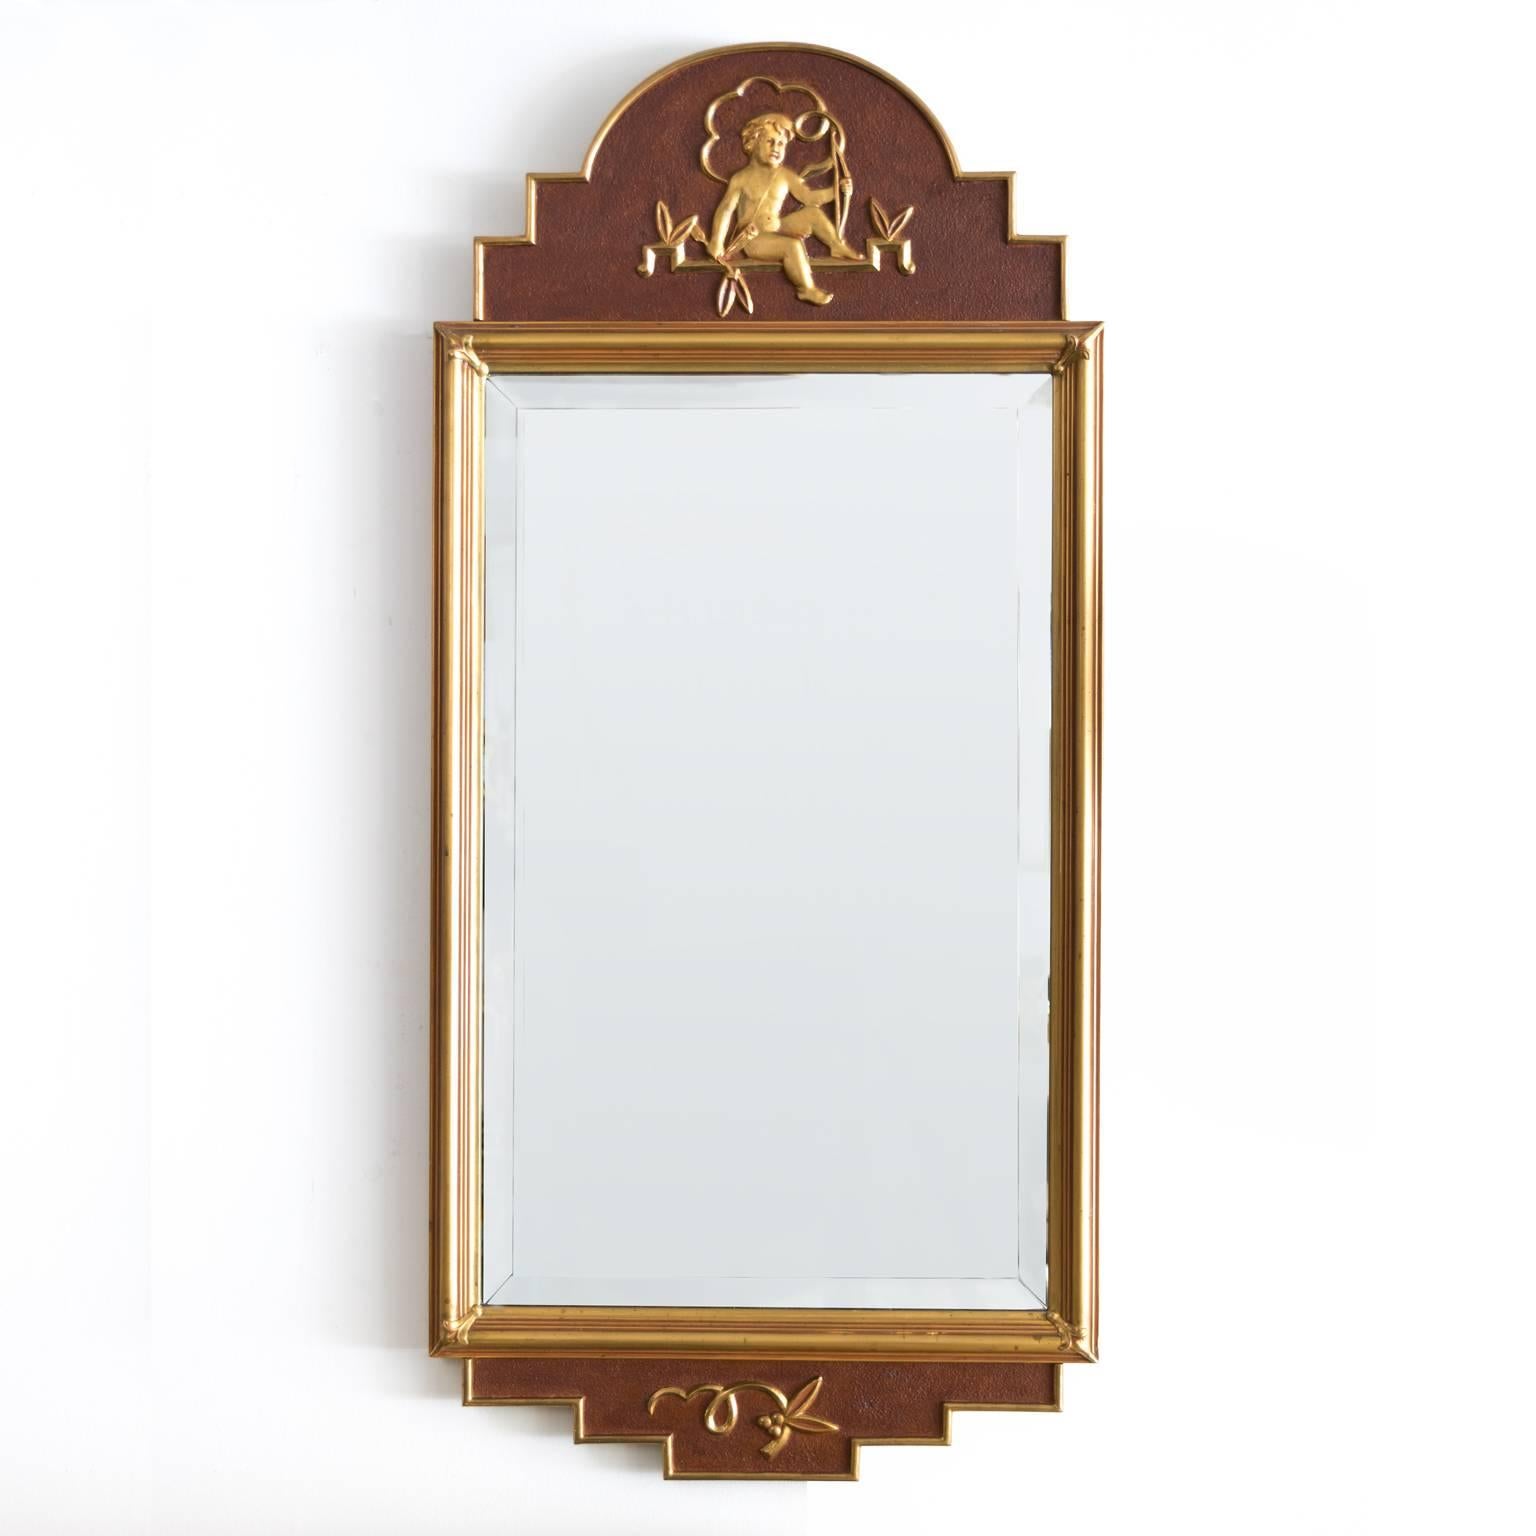 Swedish Art Deco mirror with gilt carved details which include a seated putto holding a bow, arrow and quiver against a faux mahogany painted gesso background. Made by W. Lundell, signed 1942.
 
Measures: Height 40.5